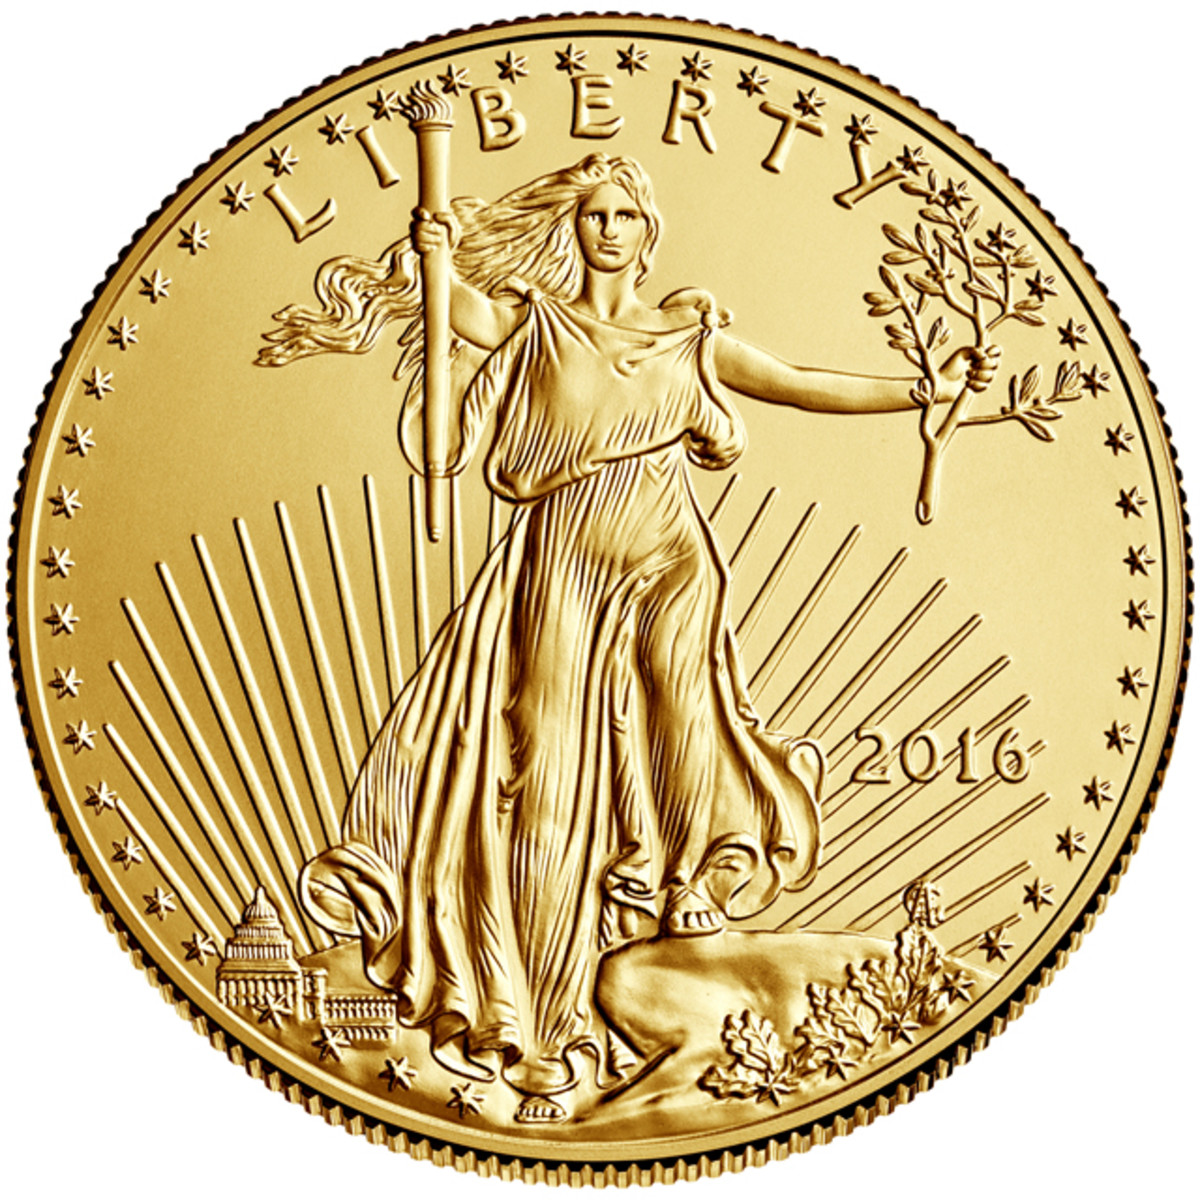 Gold Eagle sales are up